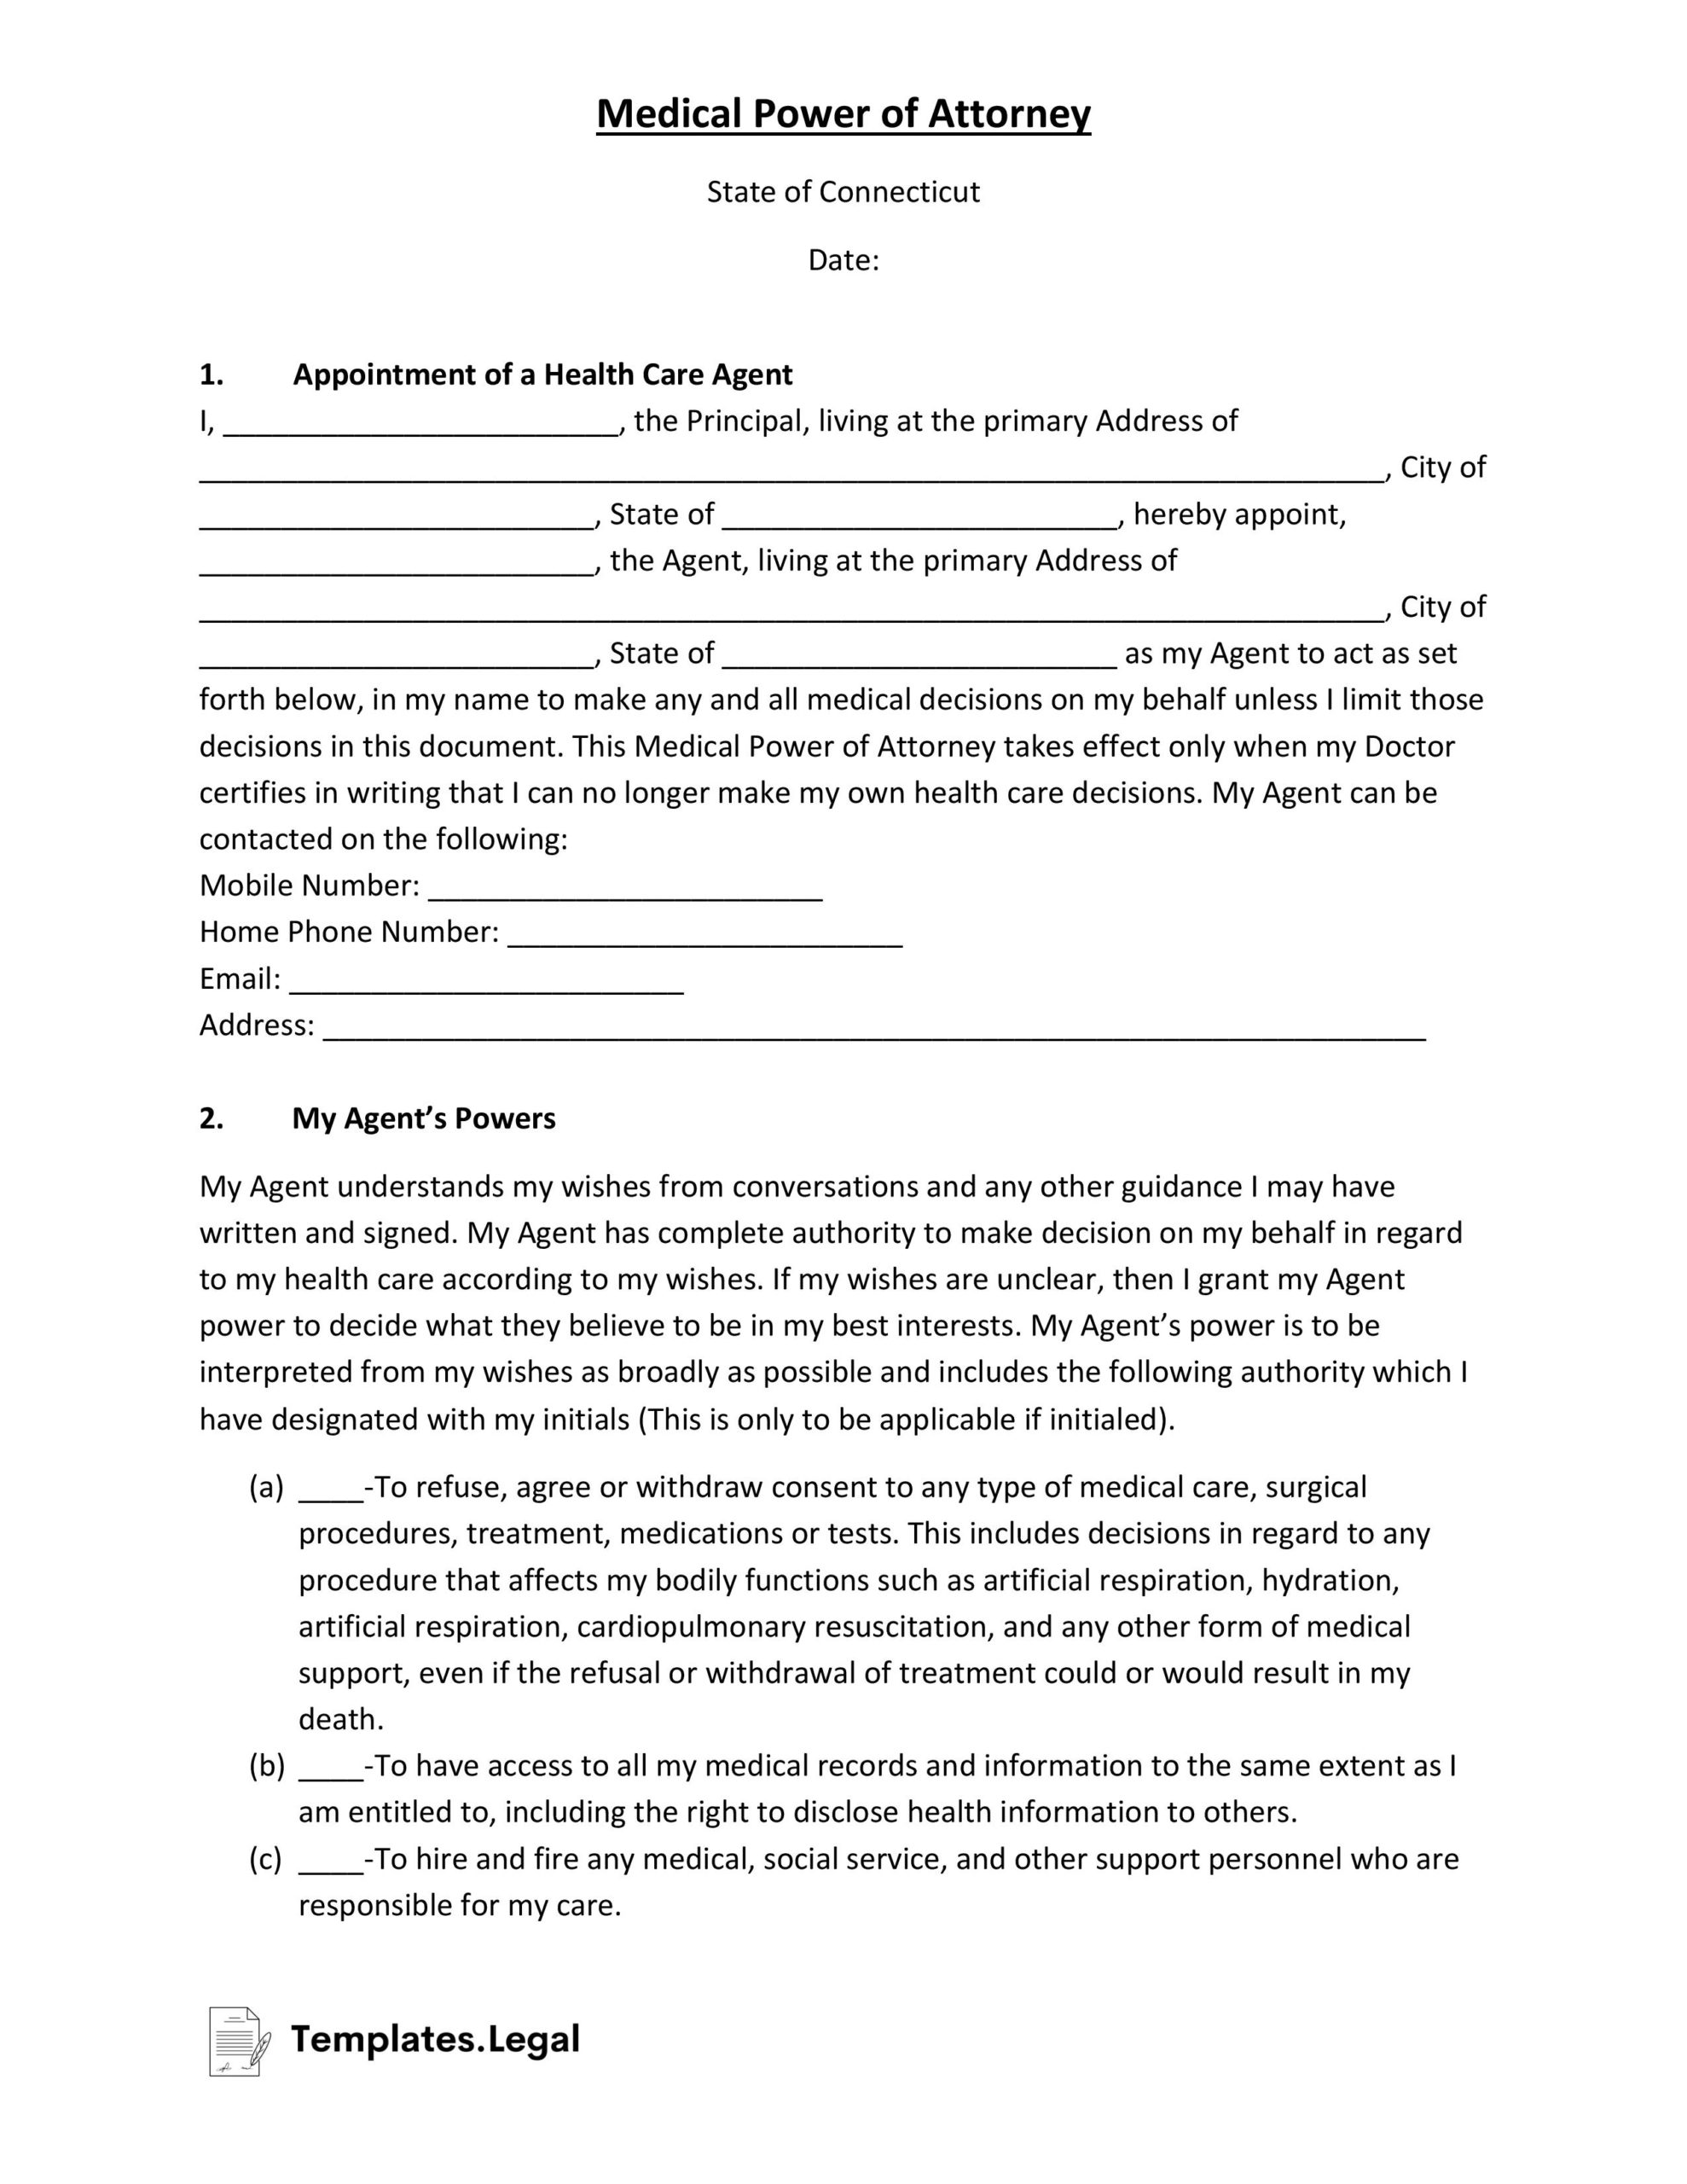 Connecticut Medical Power of Attorney- Templates.Legal